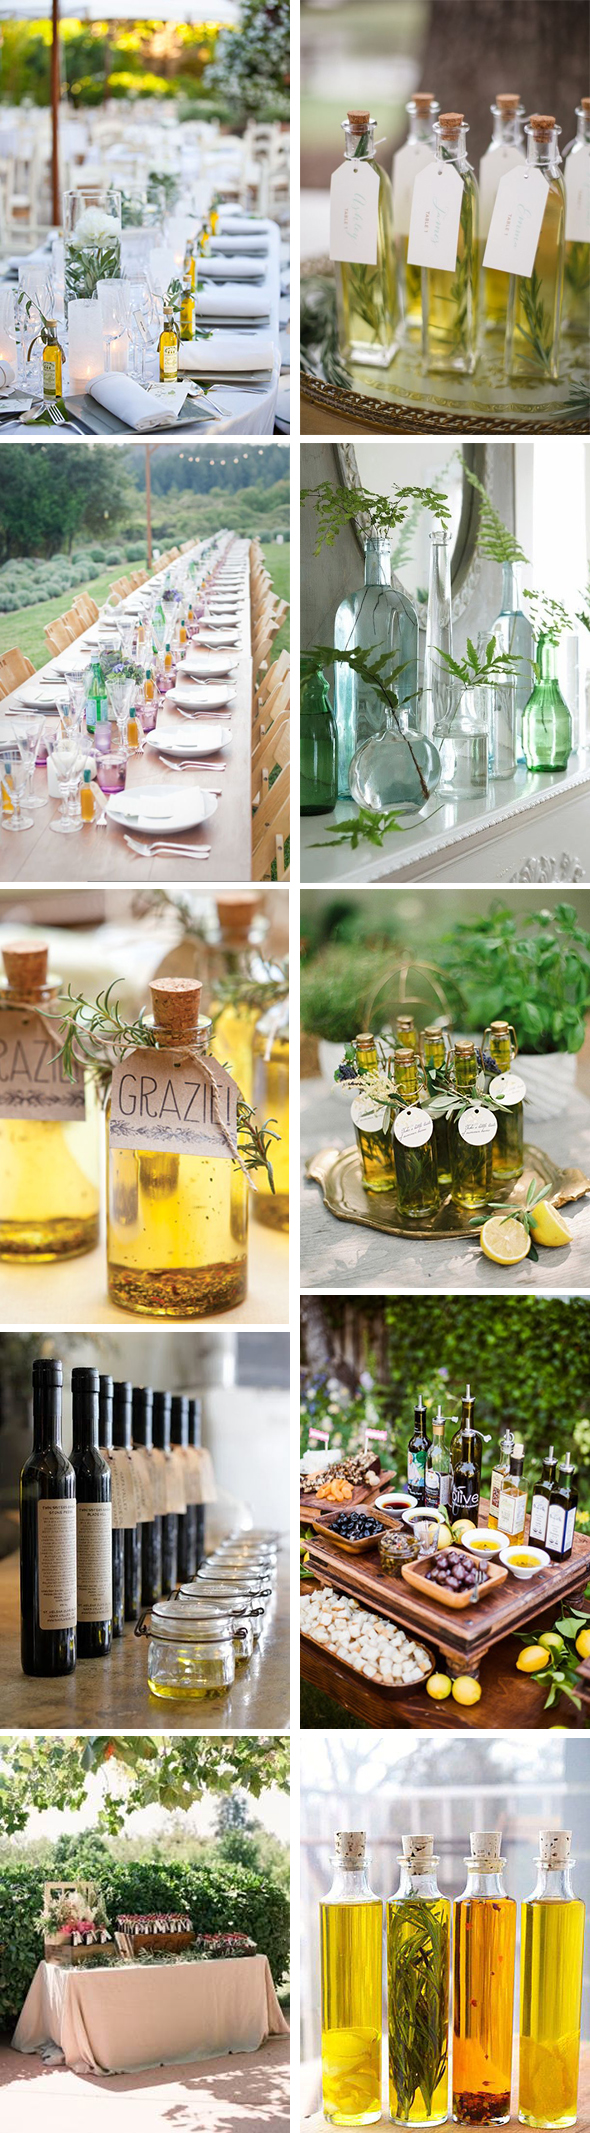 olive oil themed wedding